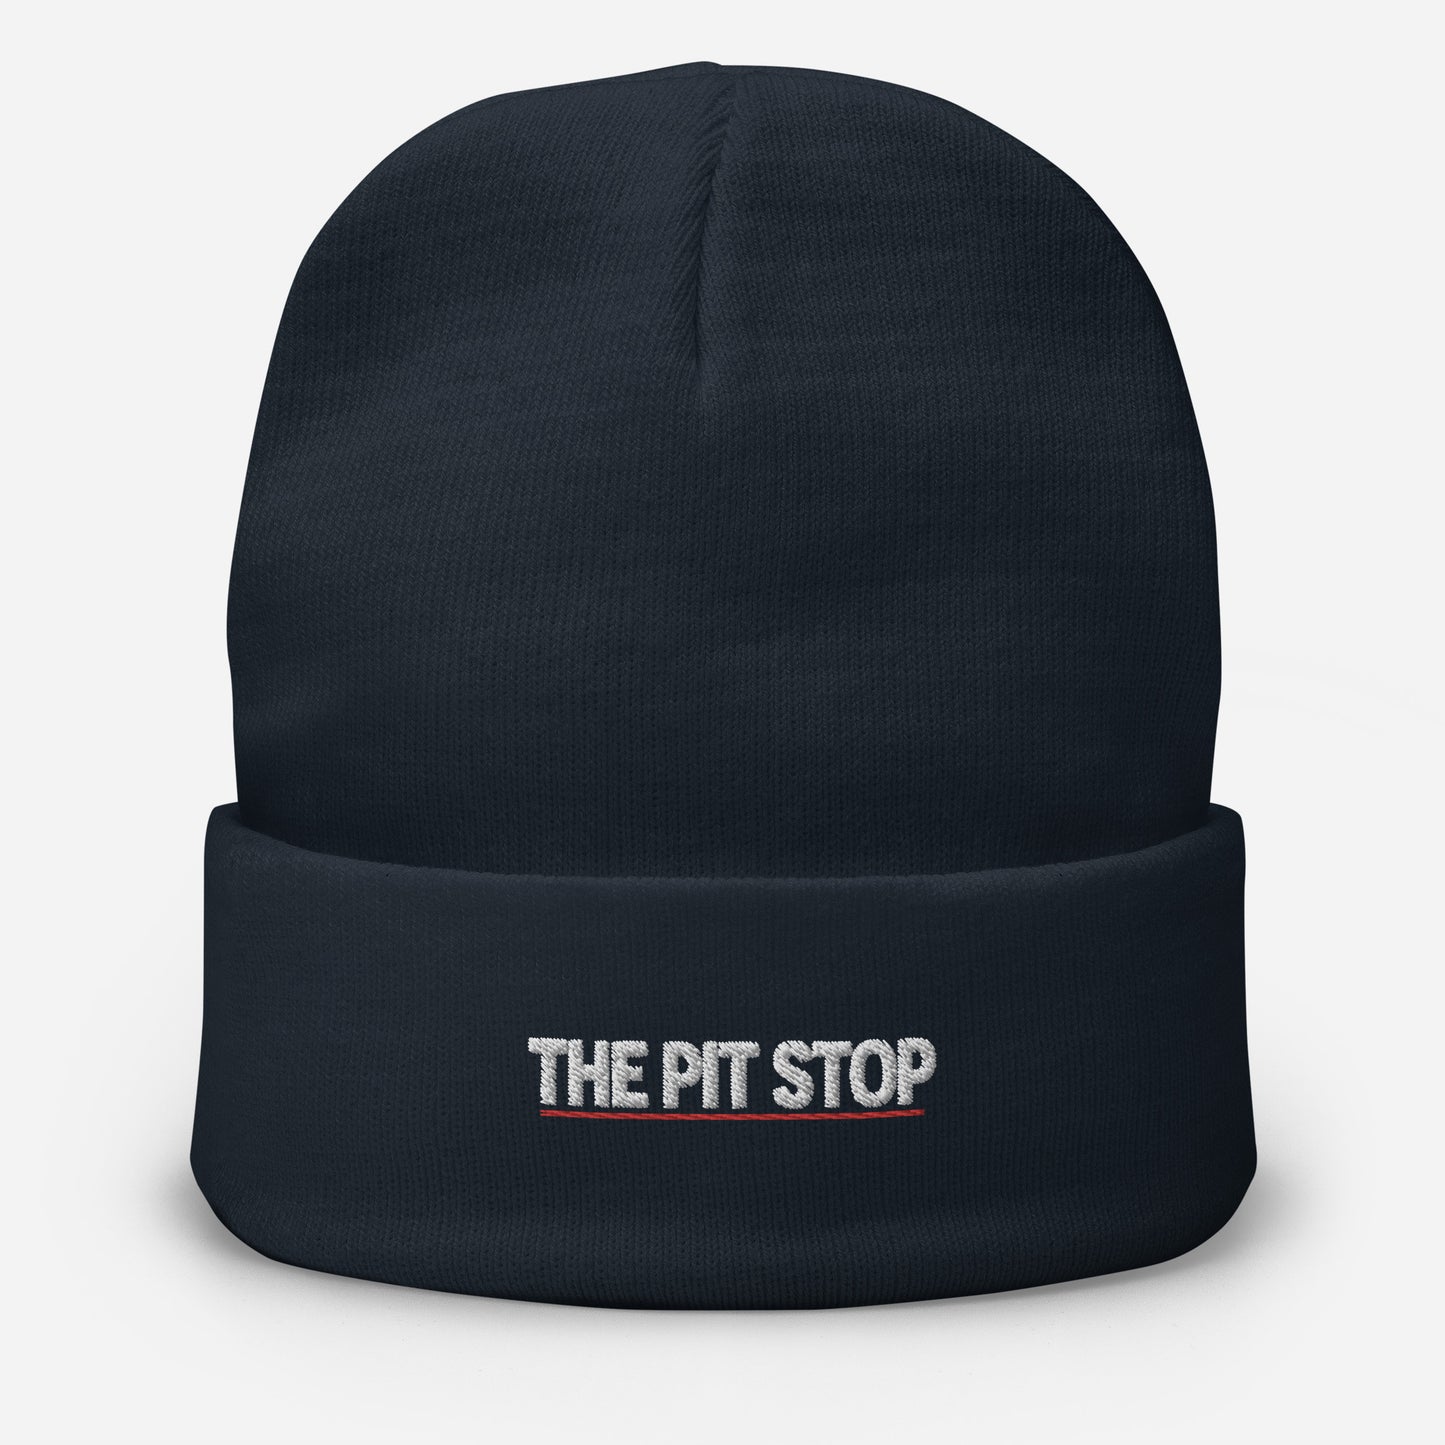 The Pit Stop Beanie hat